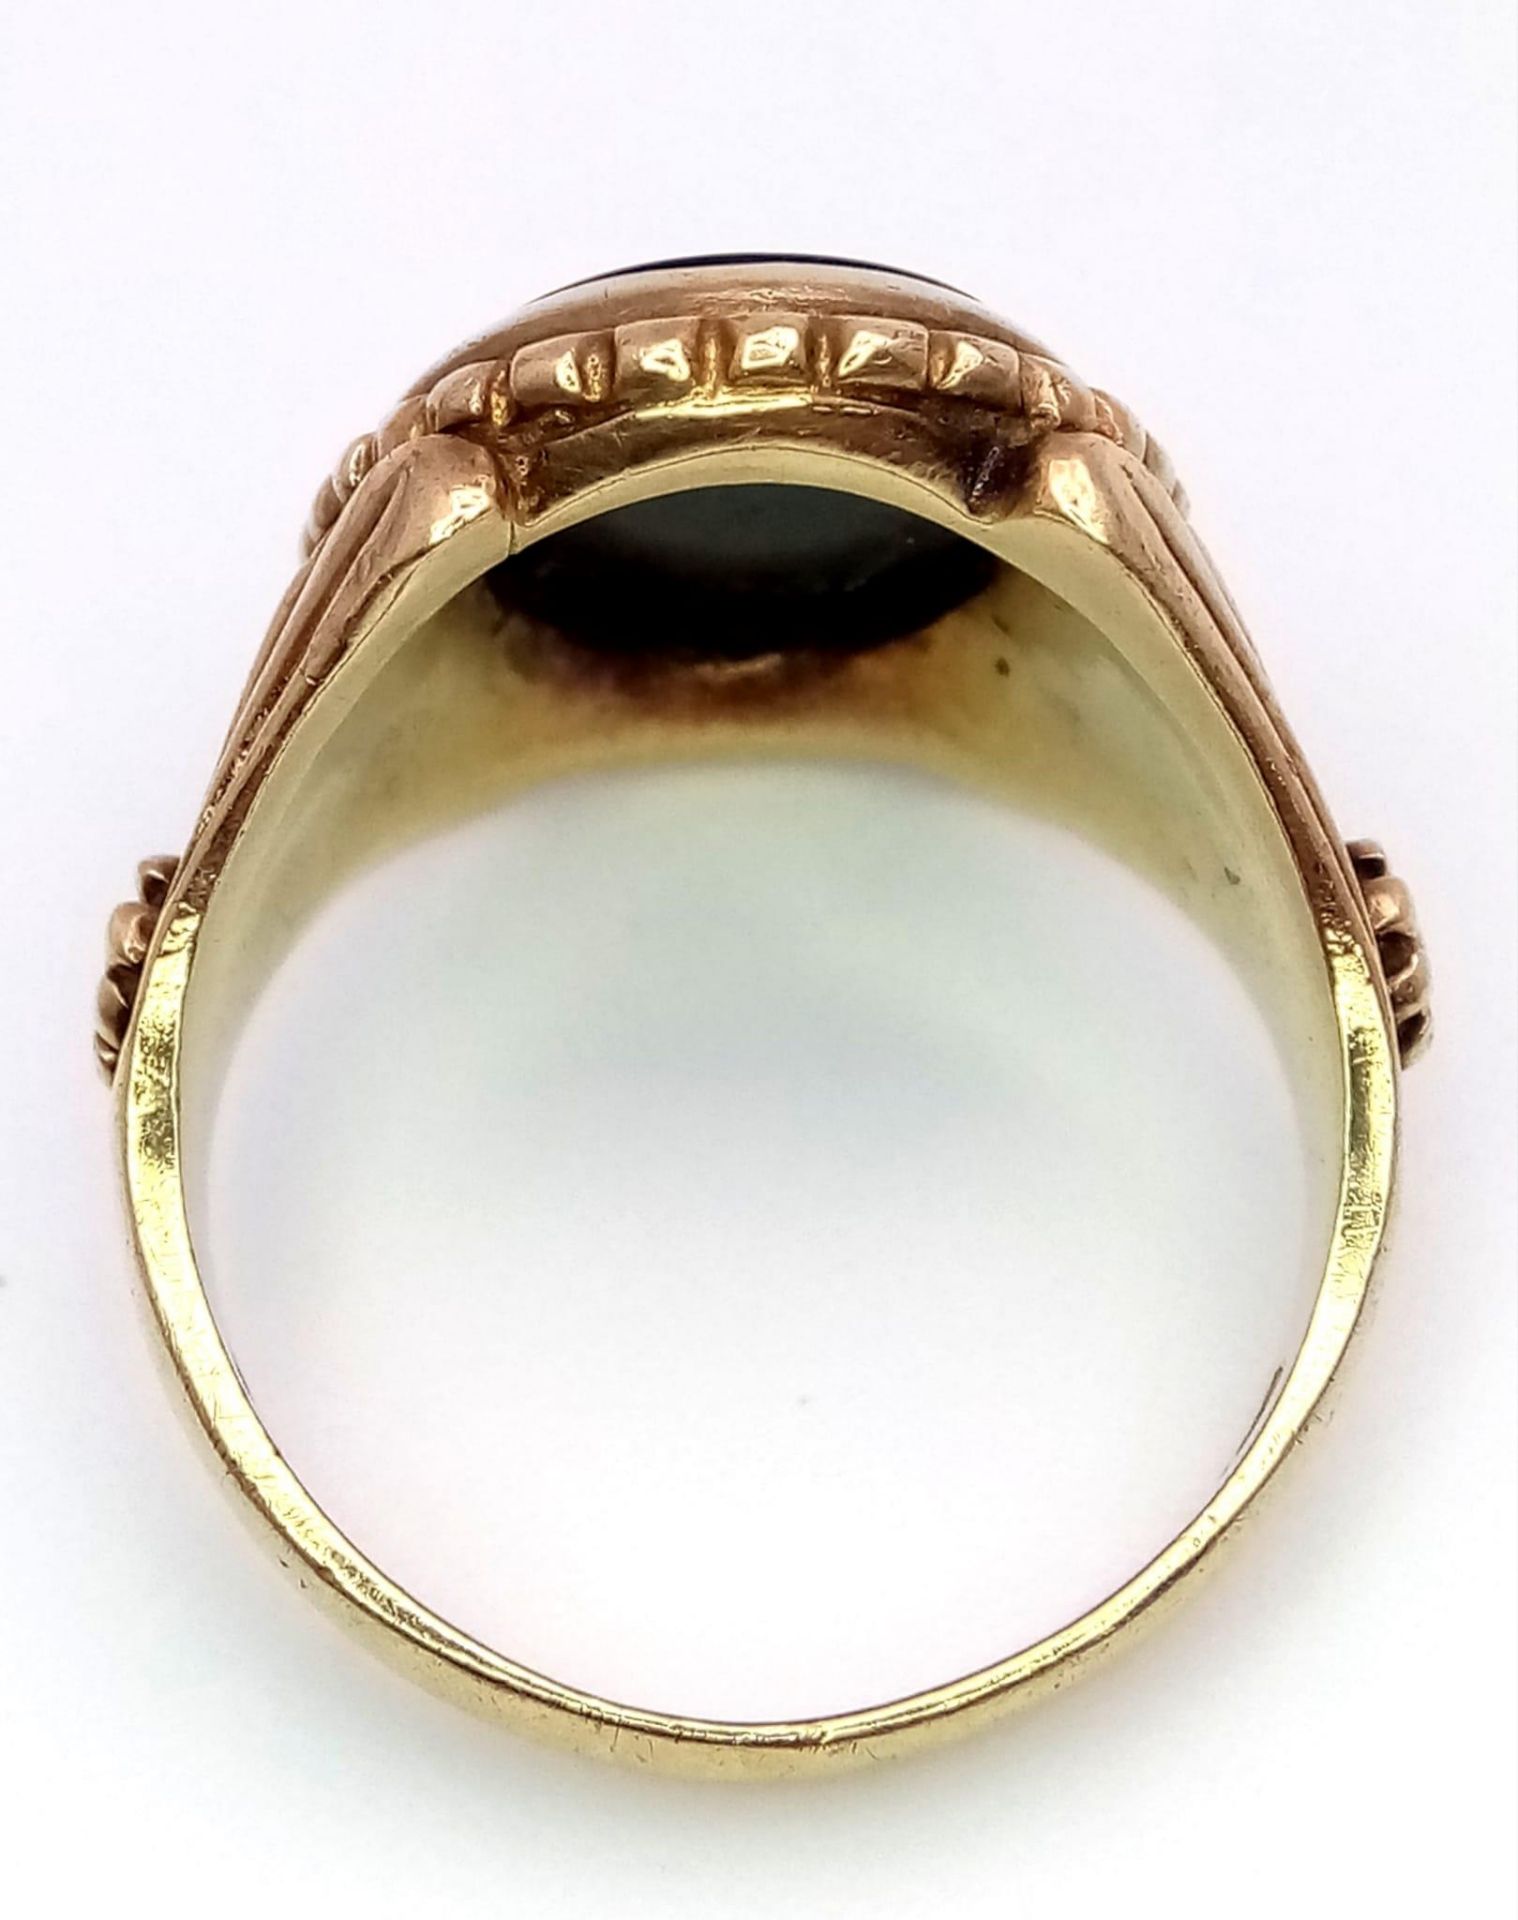 A GENTS 9K GOLD REGAL LOOKING SIGNET RING WITH BLACK ONYX CENTRE STONE AND ORNATE SHOULDER WORK. - Bild 3 aus 4